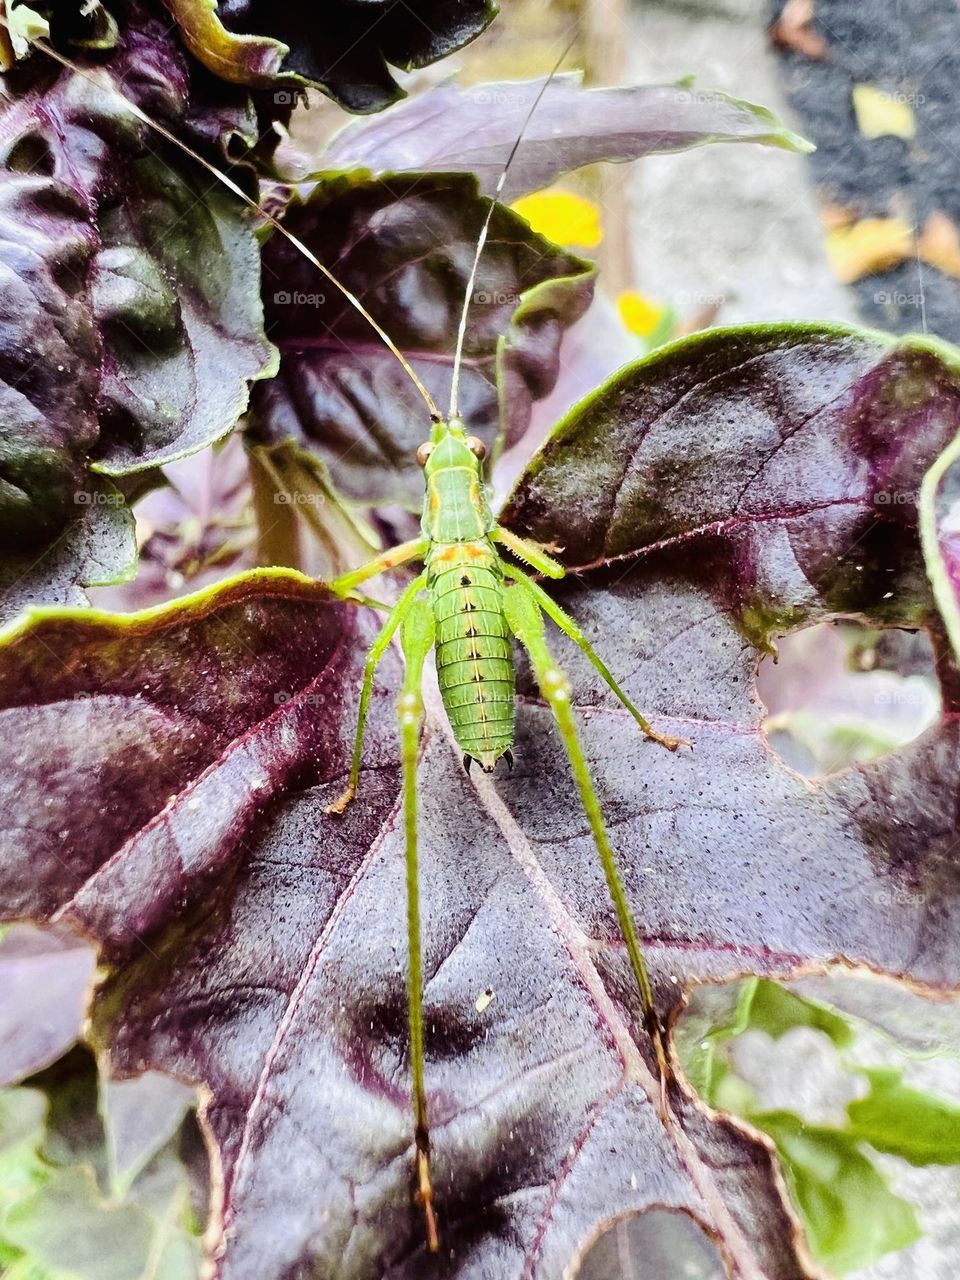 Very small katydid living on a purple basil plant. He’s spent his whole life there!